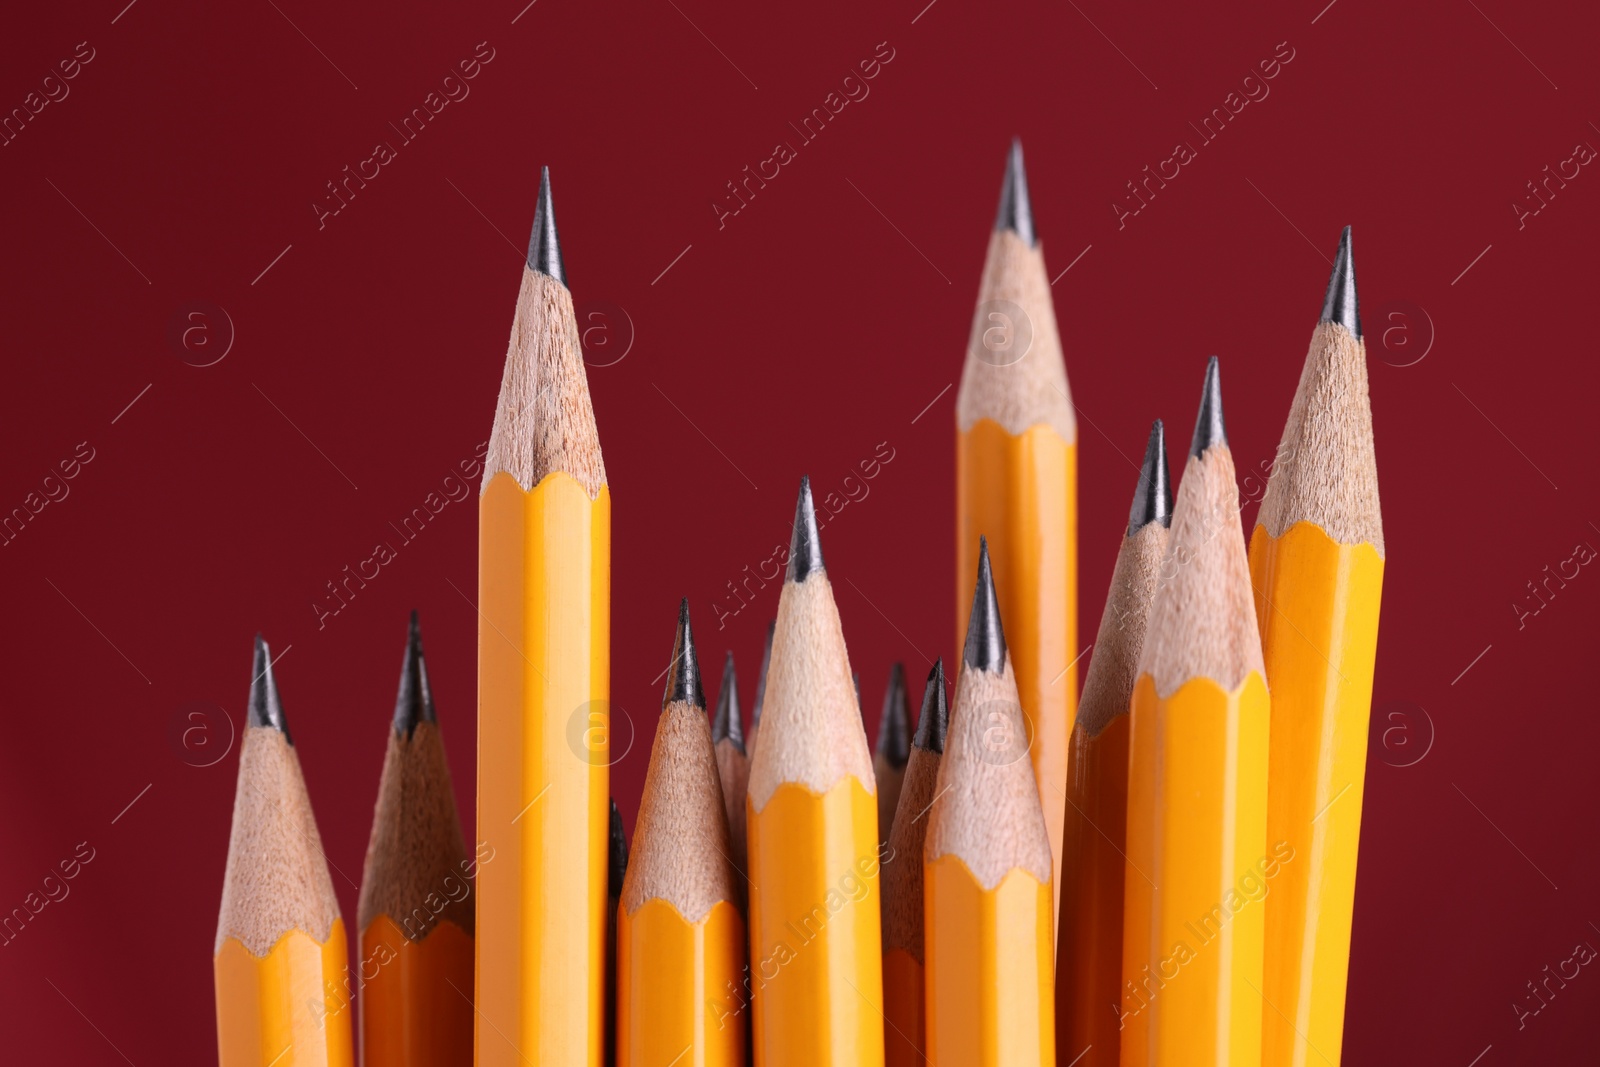 Photo of Many graphite pencils on burgundy background, macro view